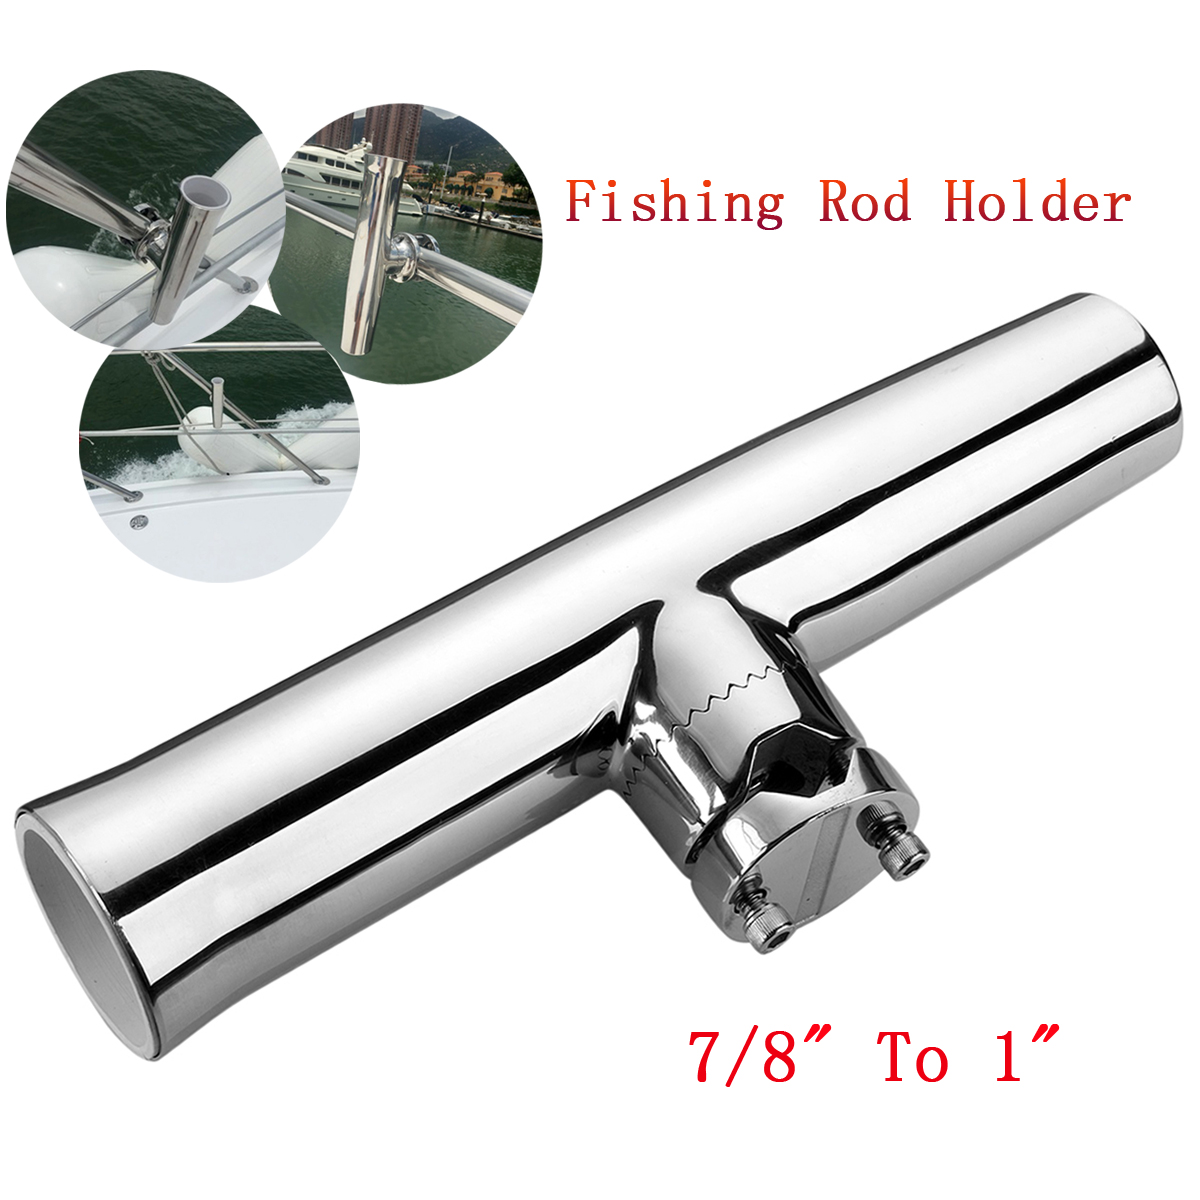 316-Stainless-Steel-78-1-Tube-Fishing-Rod-Holder-Boat-Tackle-Clamp-On-Rail-Mount-1283705-3